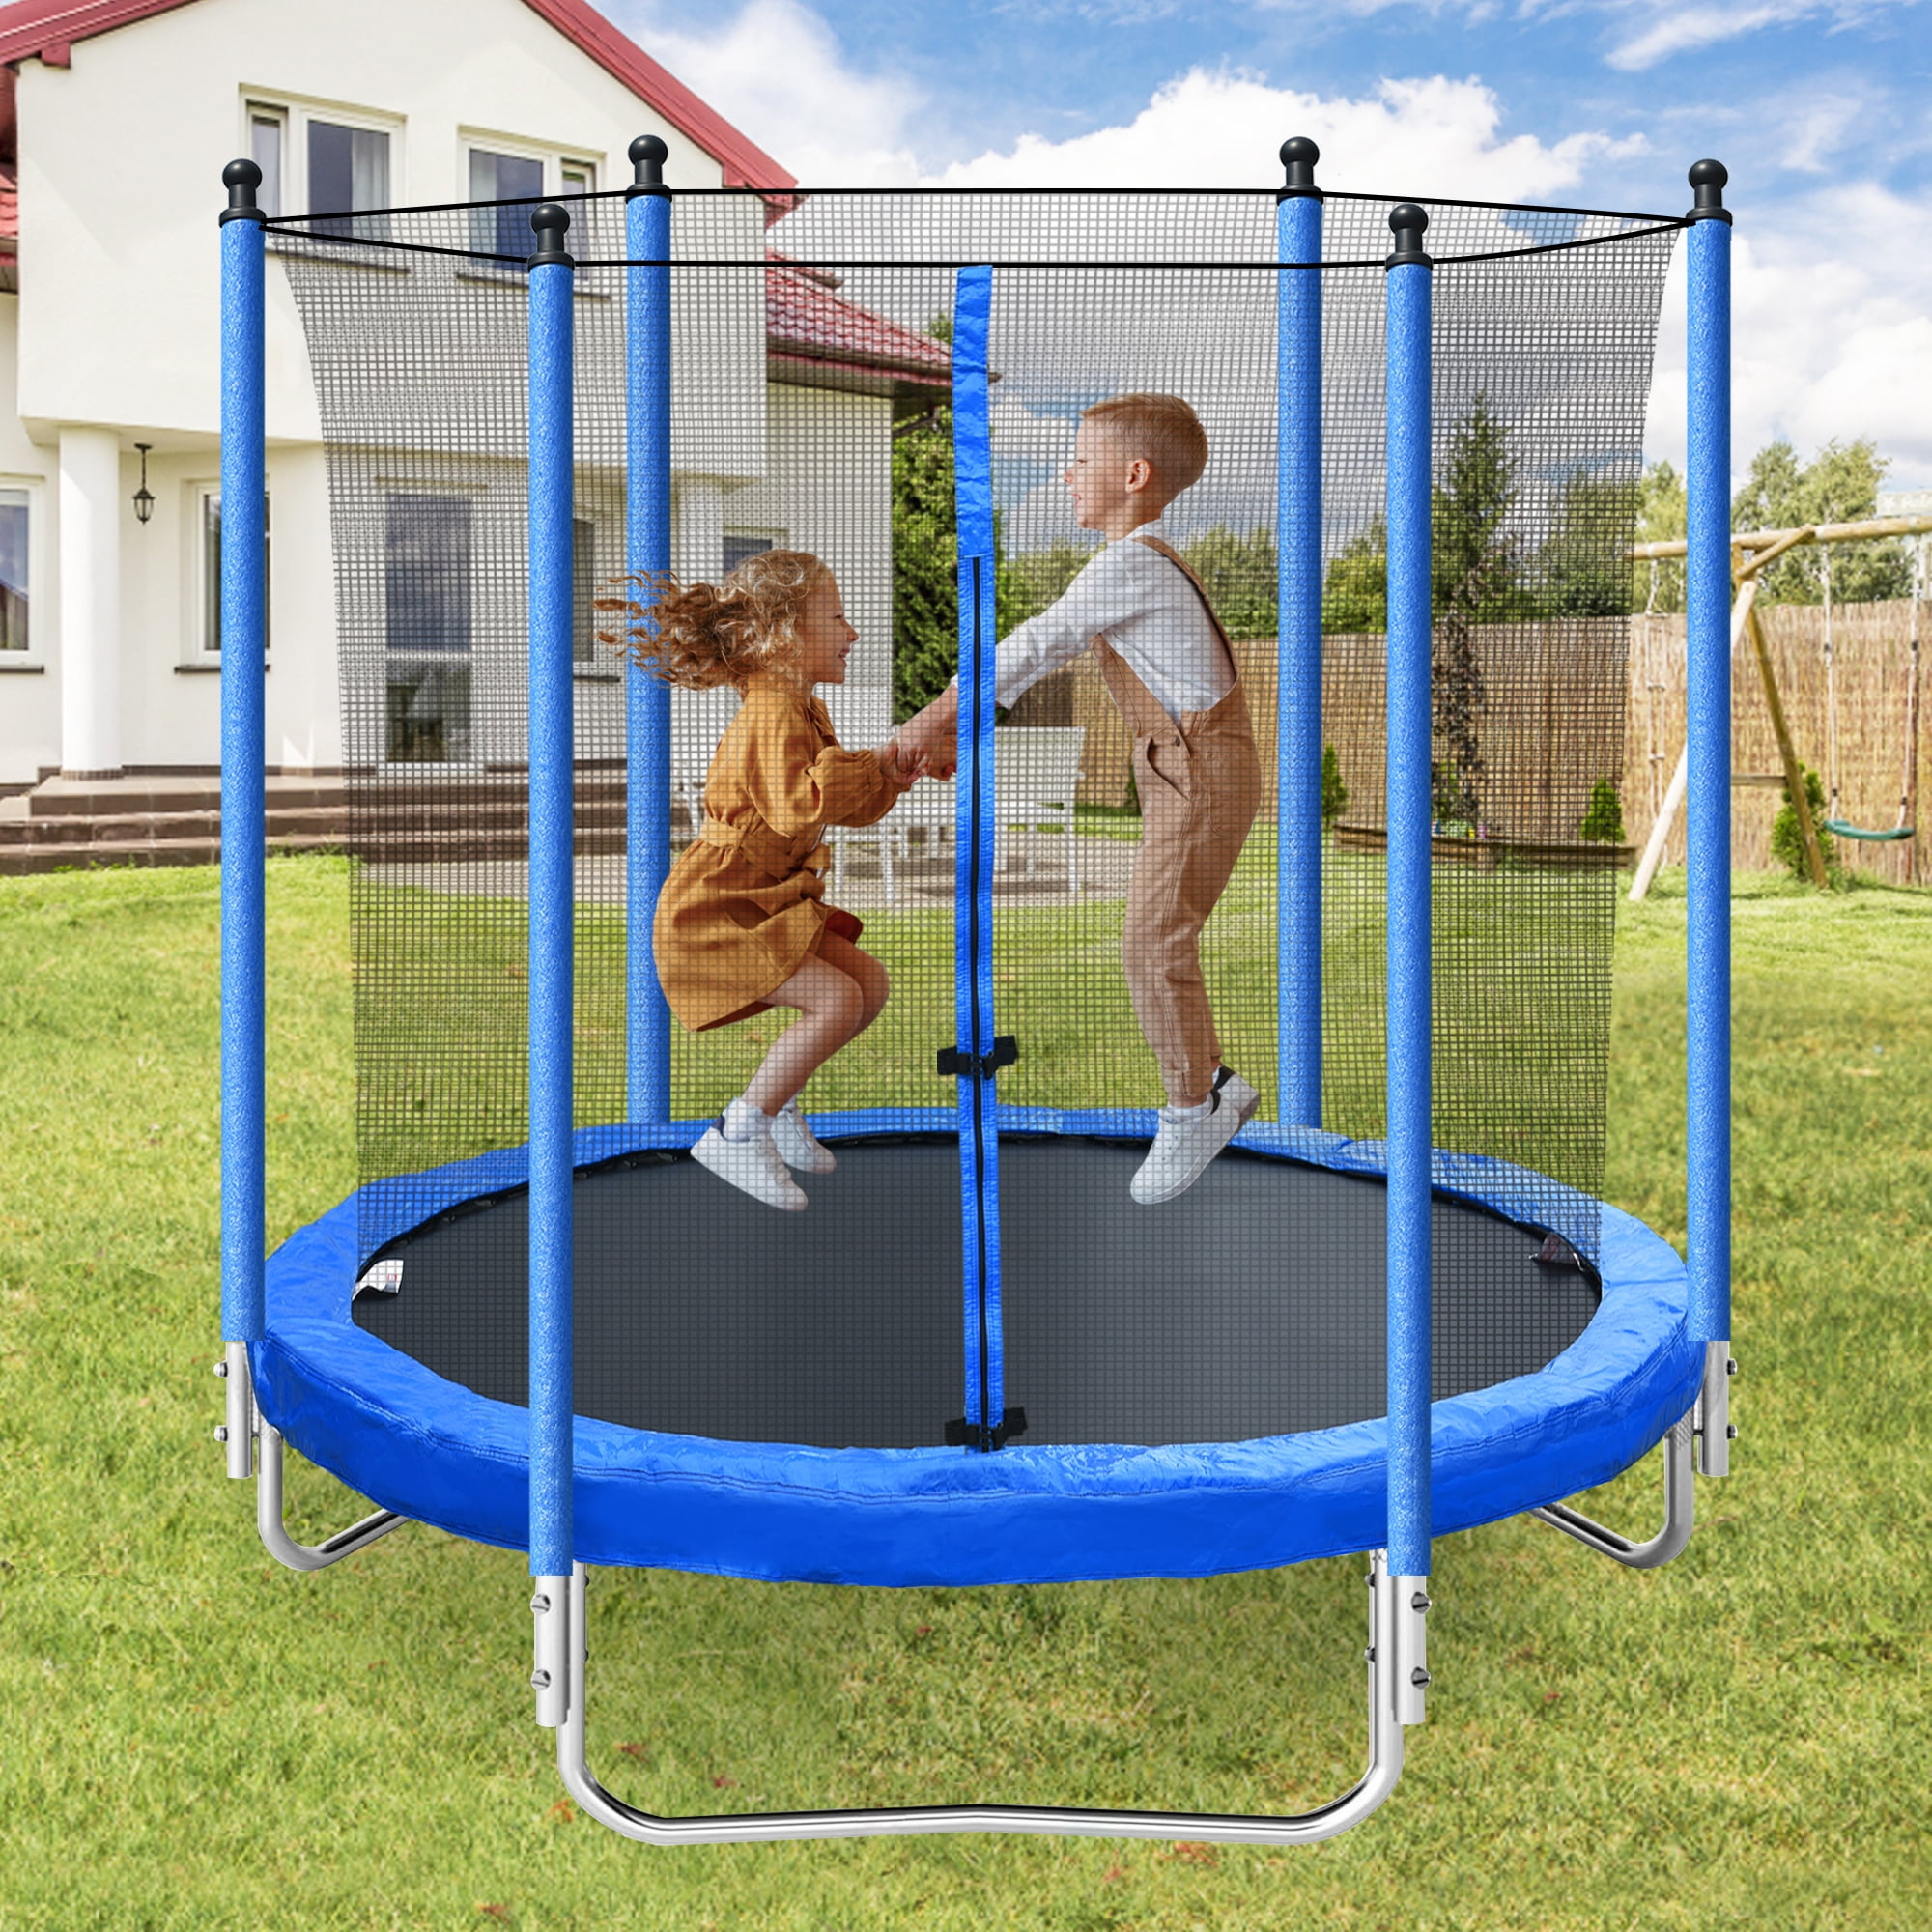 Seizeen Trampoline for Kids - 8FT Trampoline Enclosure All-Weather Steel Trampoline with 3 Heavy-Duty Support & Thickened Spring Pad, Large Round Trampoline for Indoor Outdoor, Blue - Walmart.com